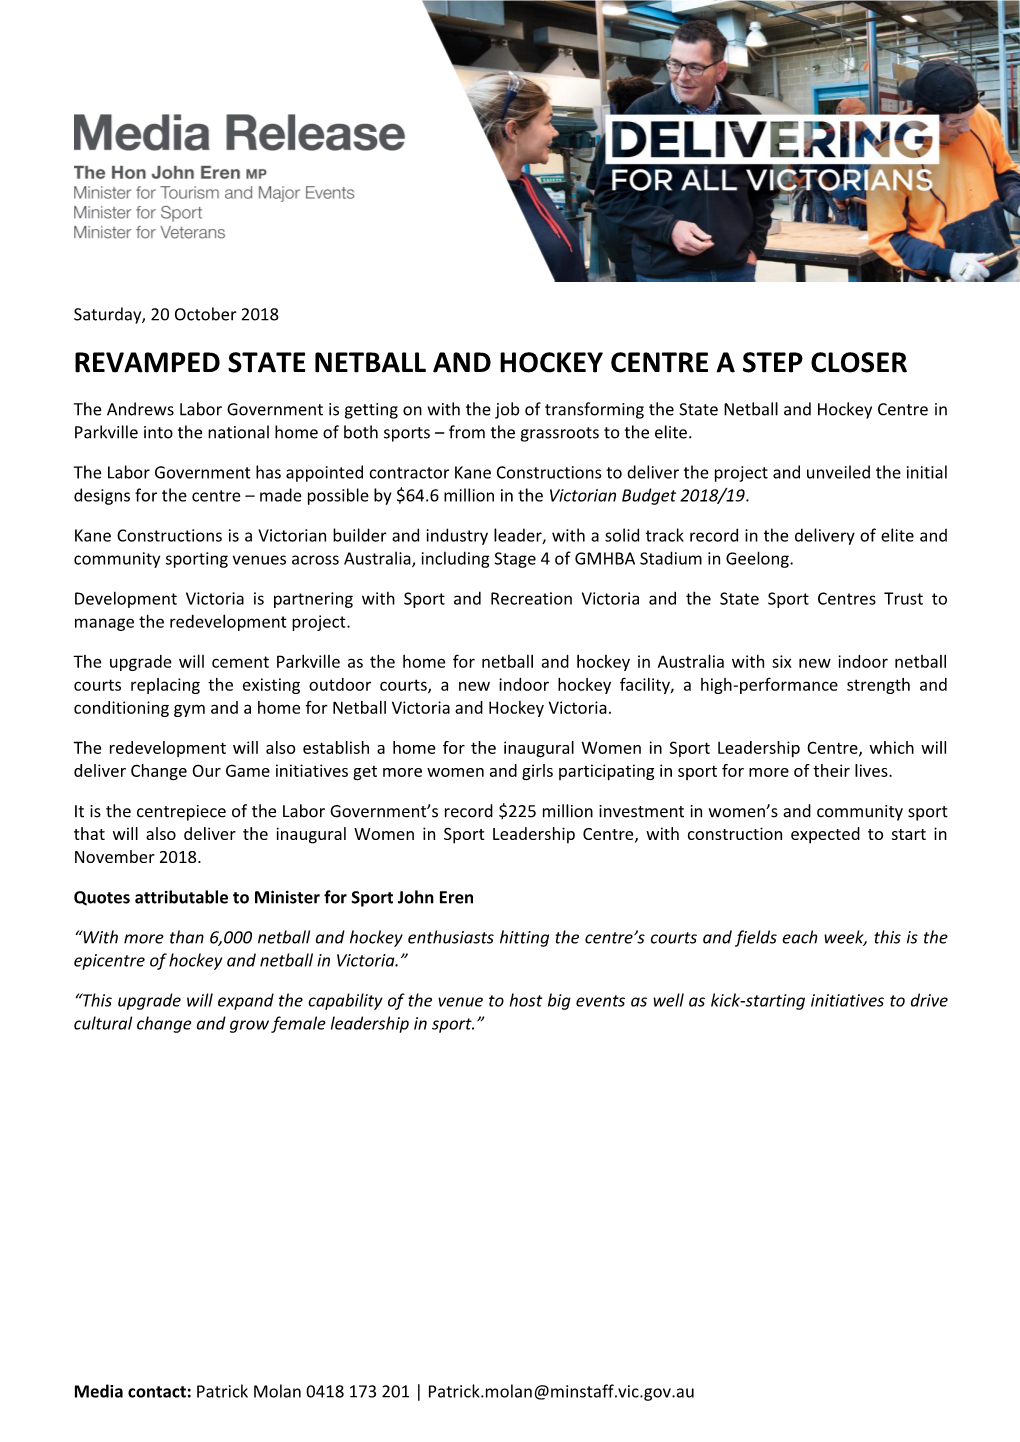 Revamped State Netball and Hockey Centre a Step Closer